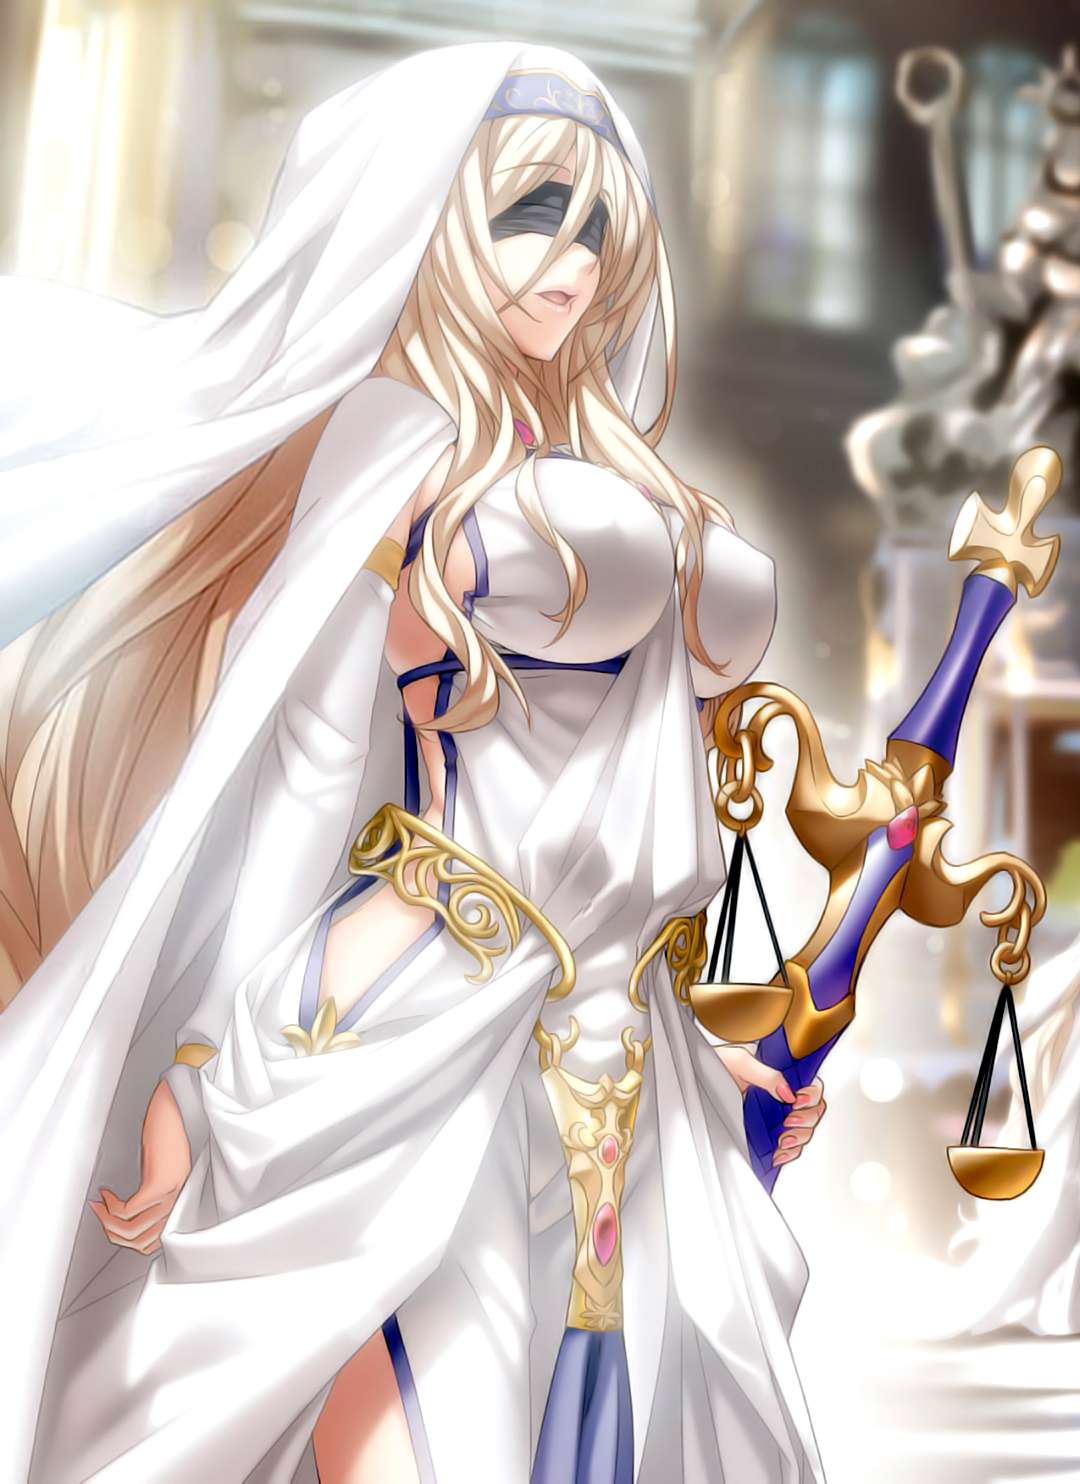 Priestess - The anime group Wallpapers and Images - Desktop Nexus Groups